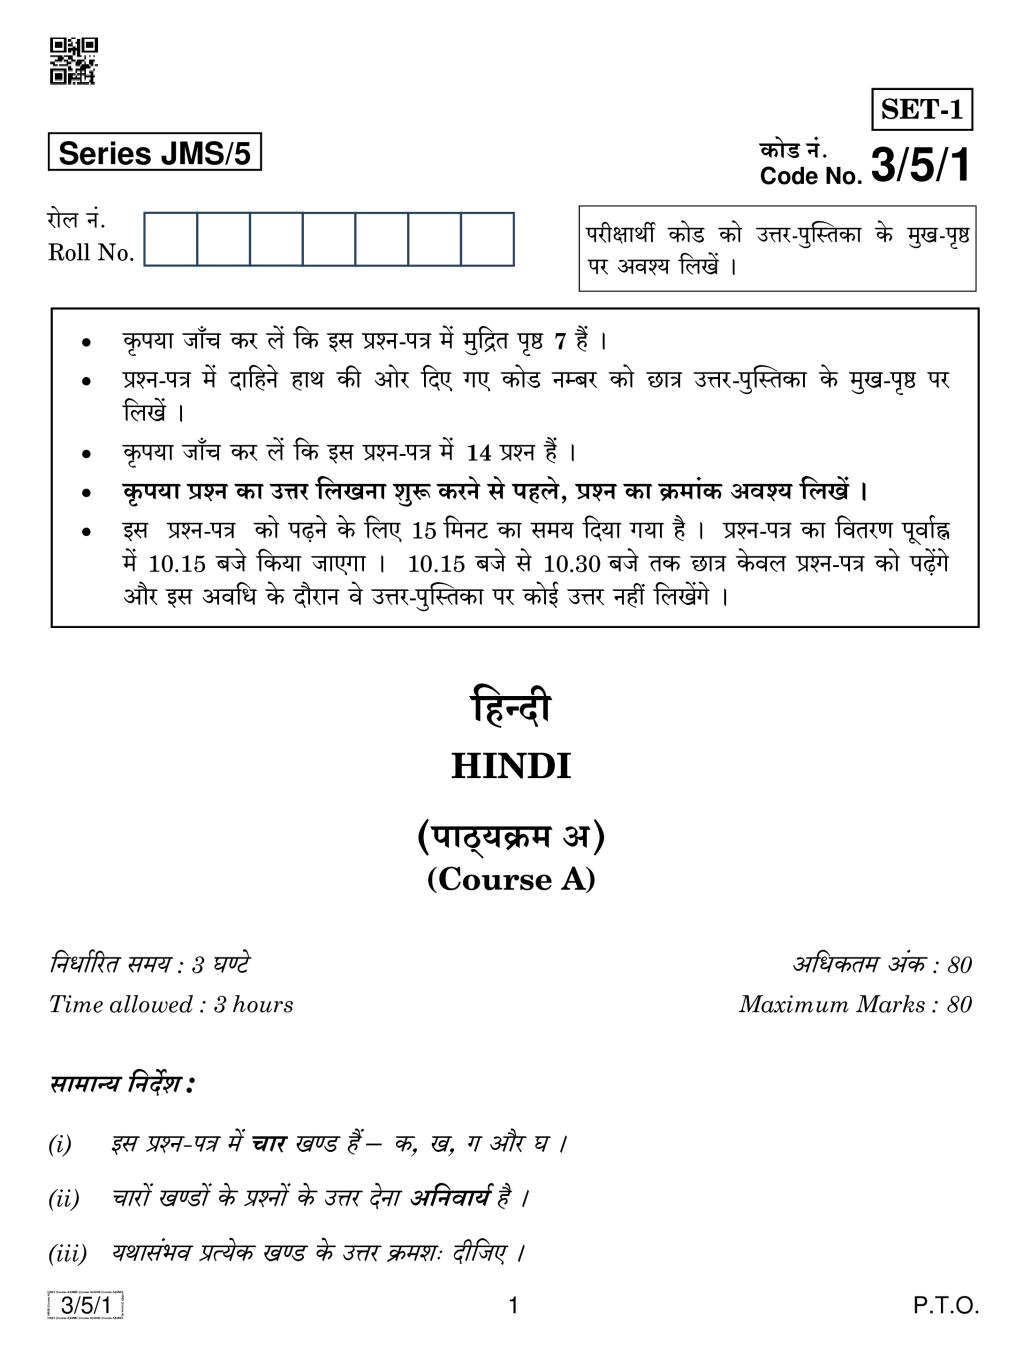 CBSE Class 10 Hindi Course A Question Paper 2019 Set 5 - Page 1